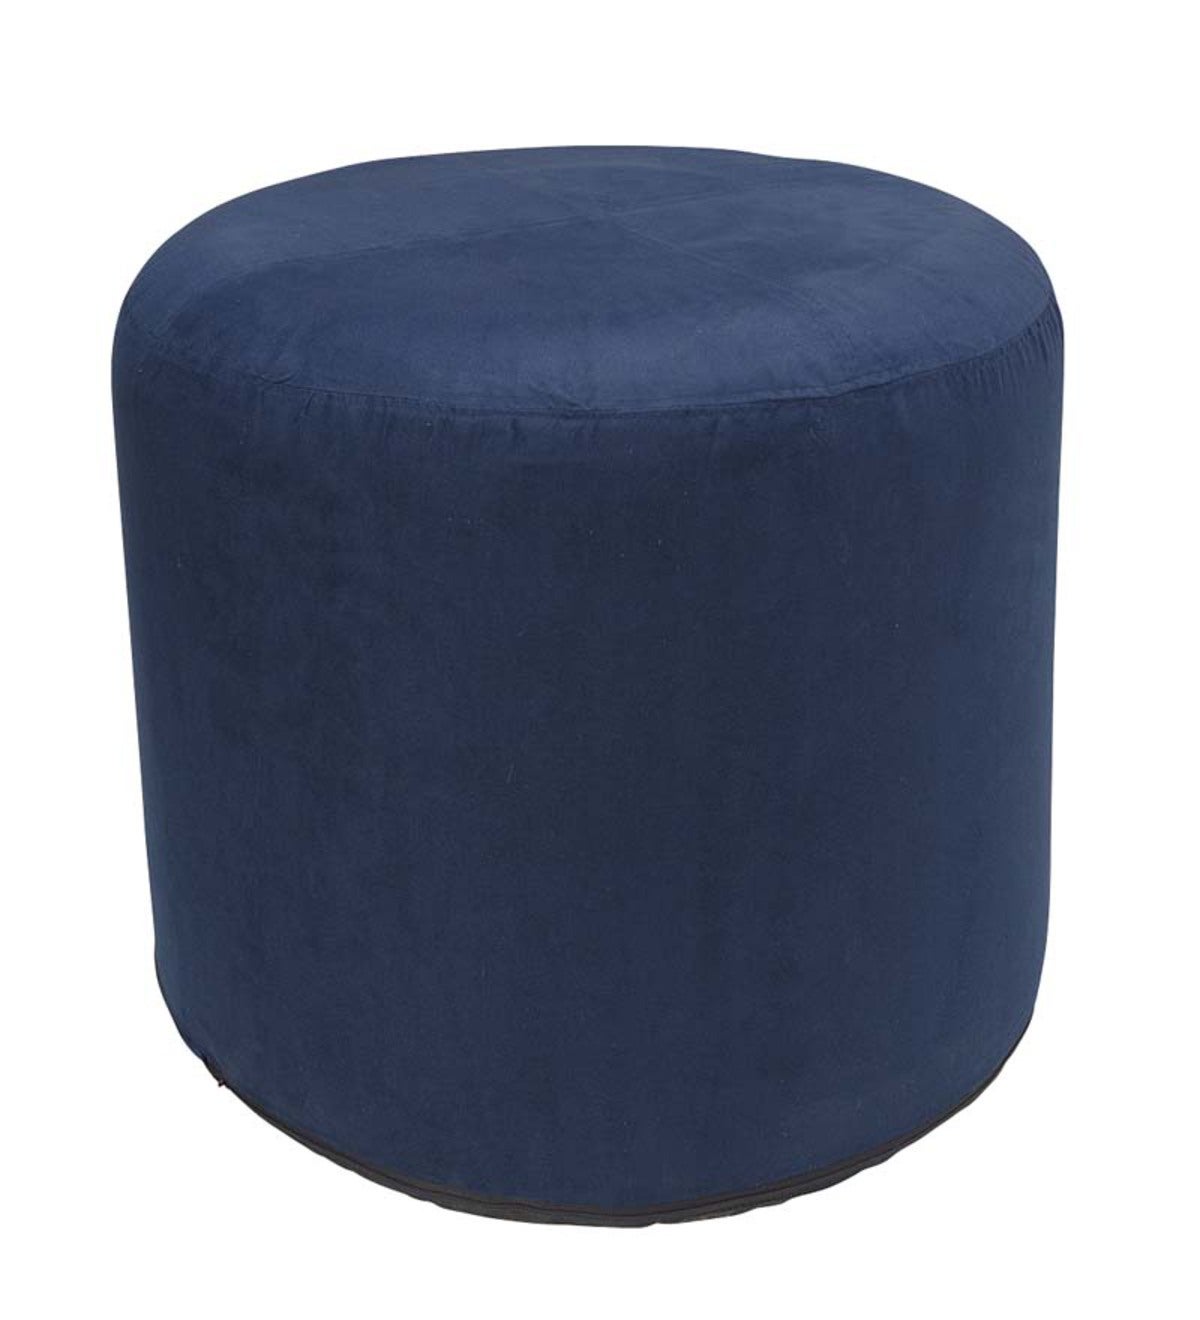 Large Round Inflatable Indoor Ottoman Pouf - Navy